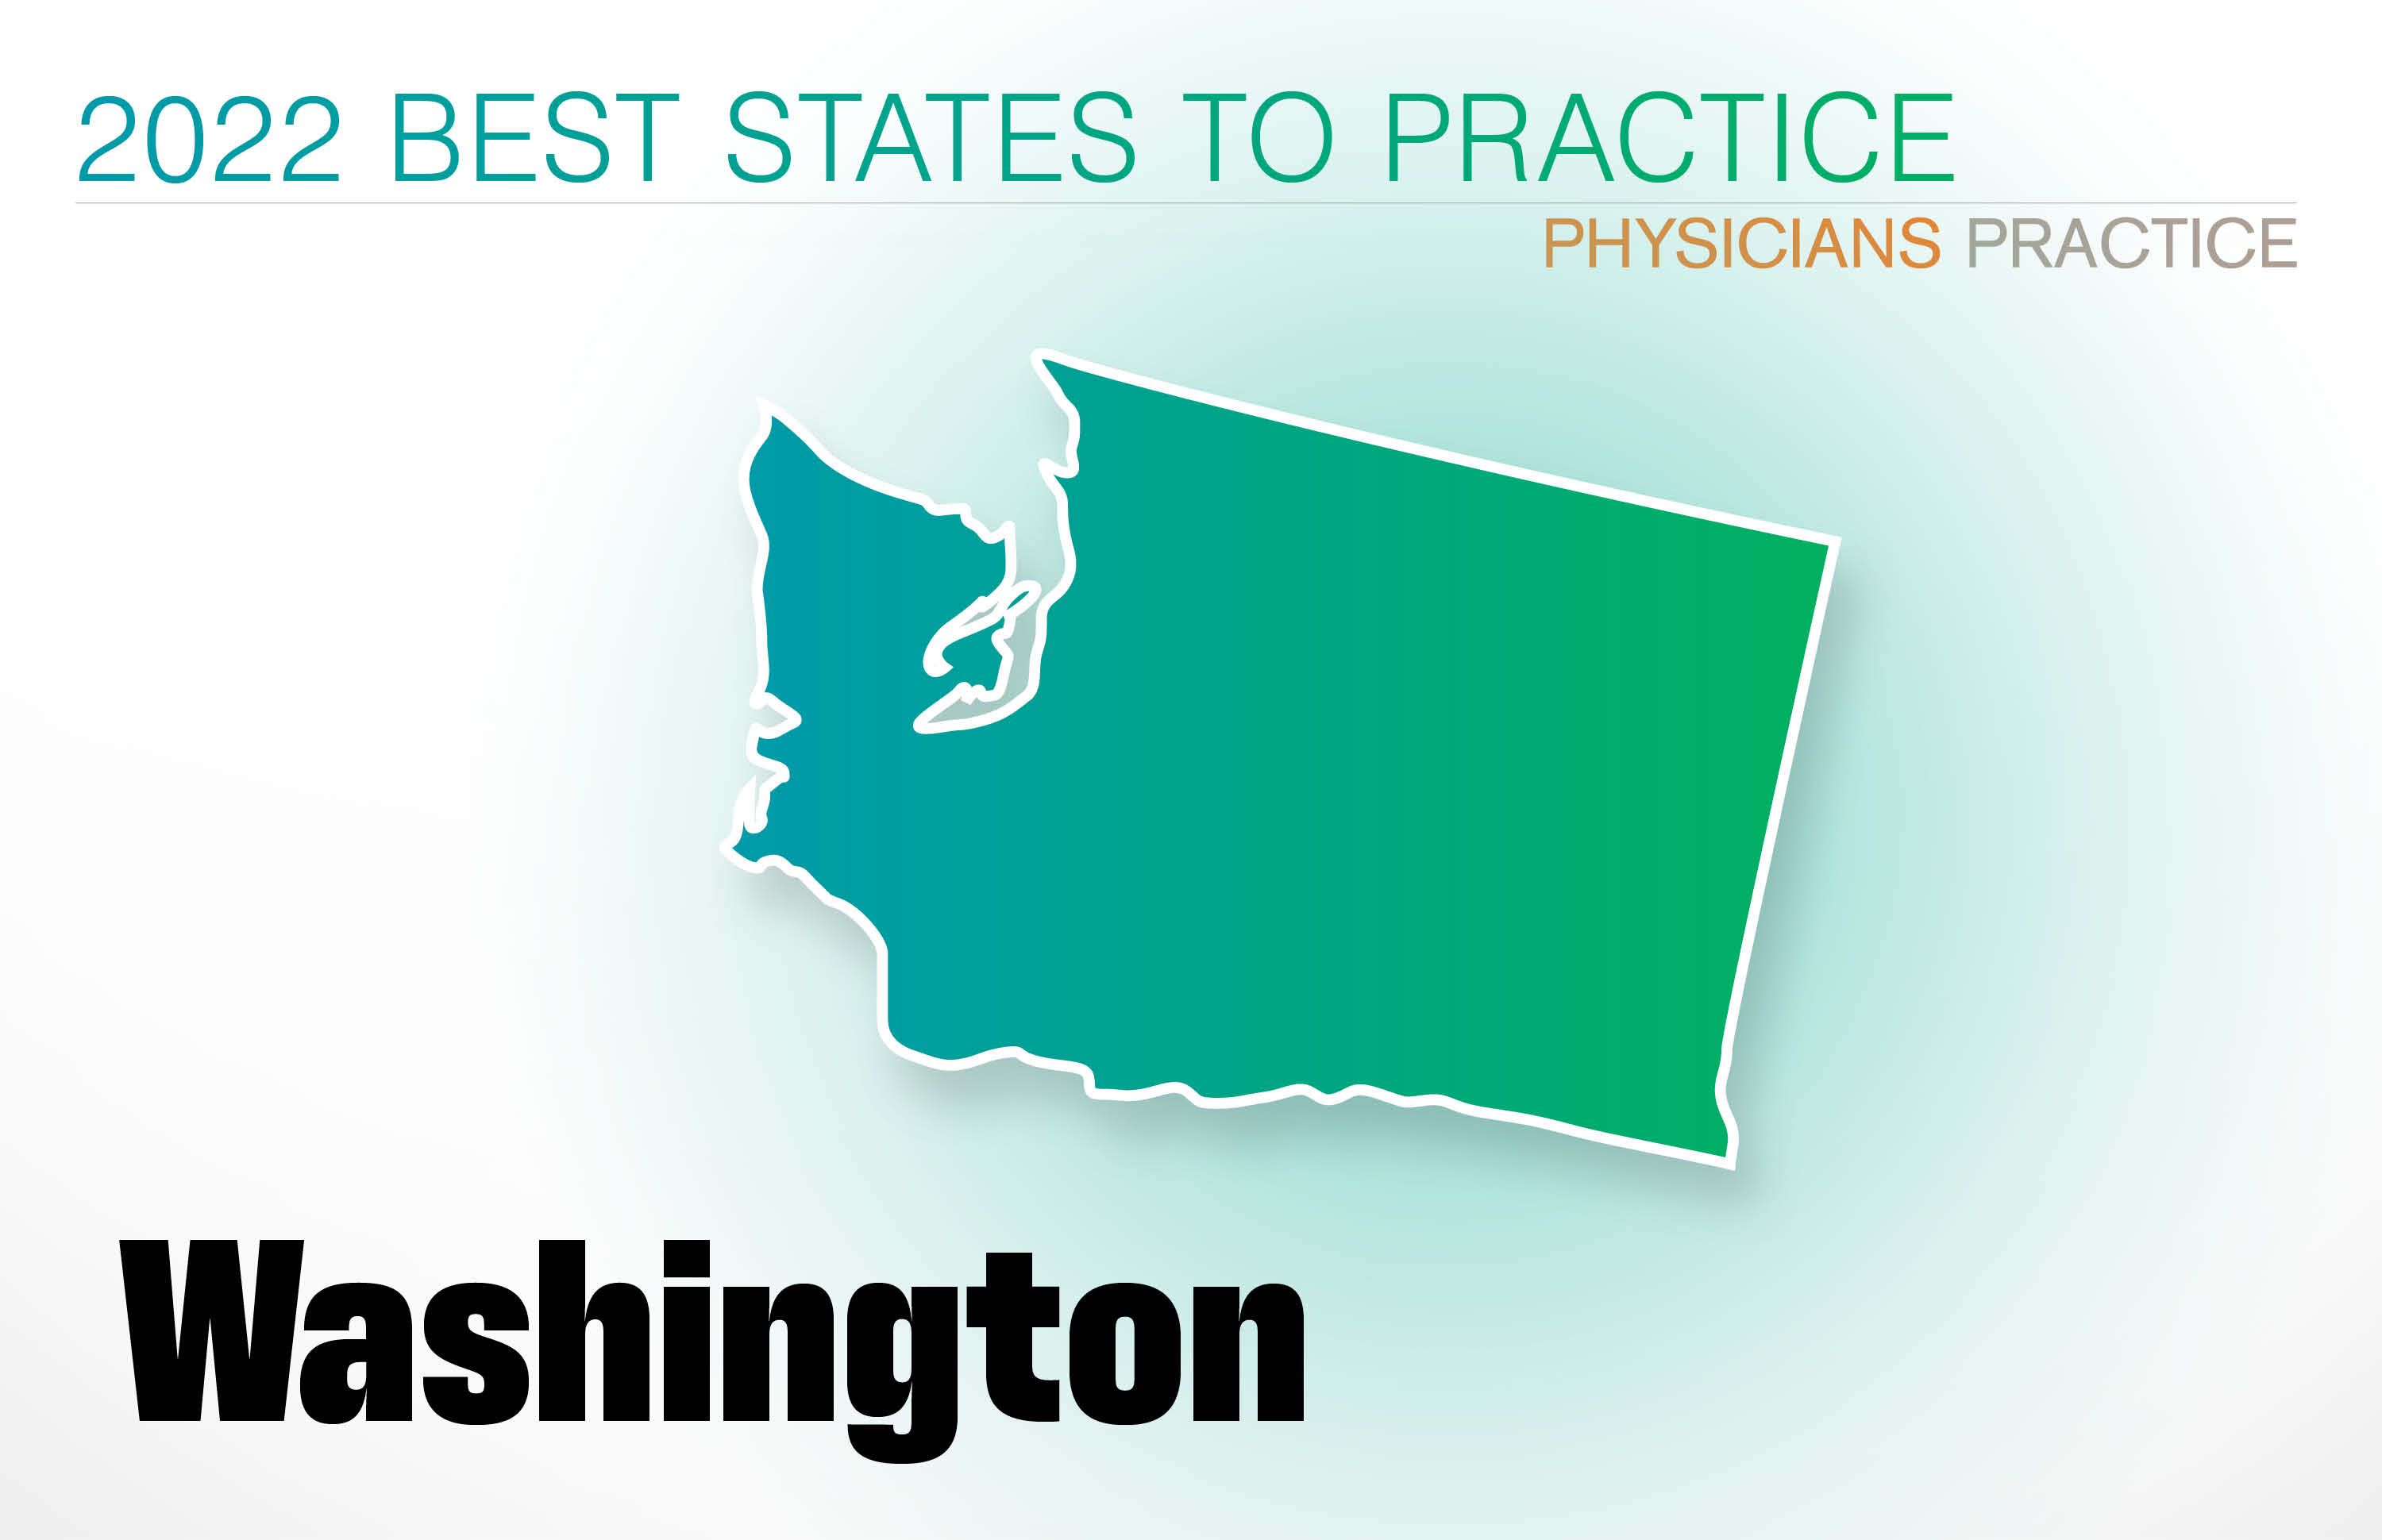 #33 Washington Rankings: Cost of living: 39 Physician density: 29 Amount of state business taxes collected: 15 Average malpractice insurance rates: 22 Quality of life: 40 GPCI: 30